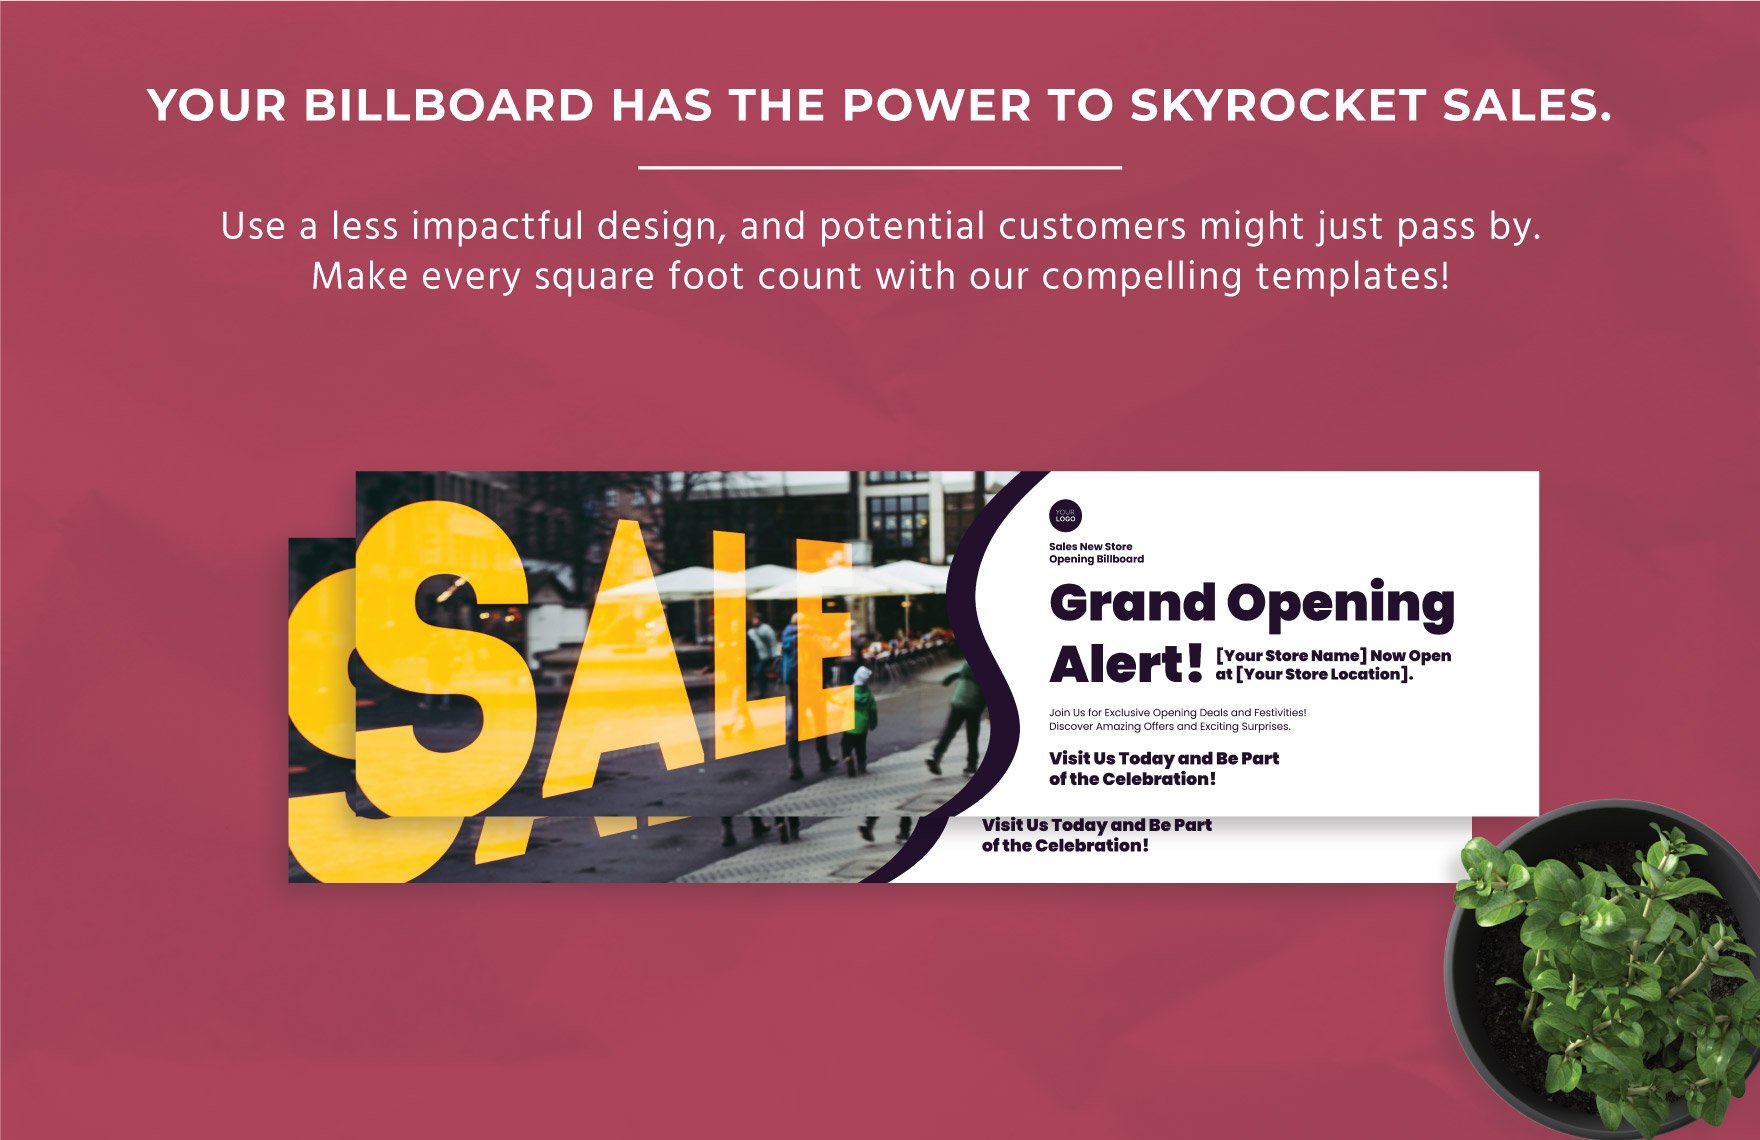 Sales New Store Opening Billboard Template